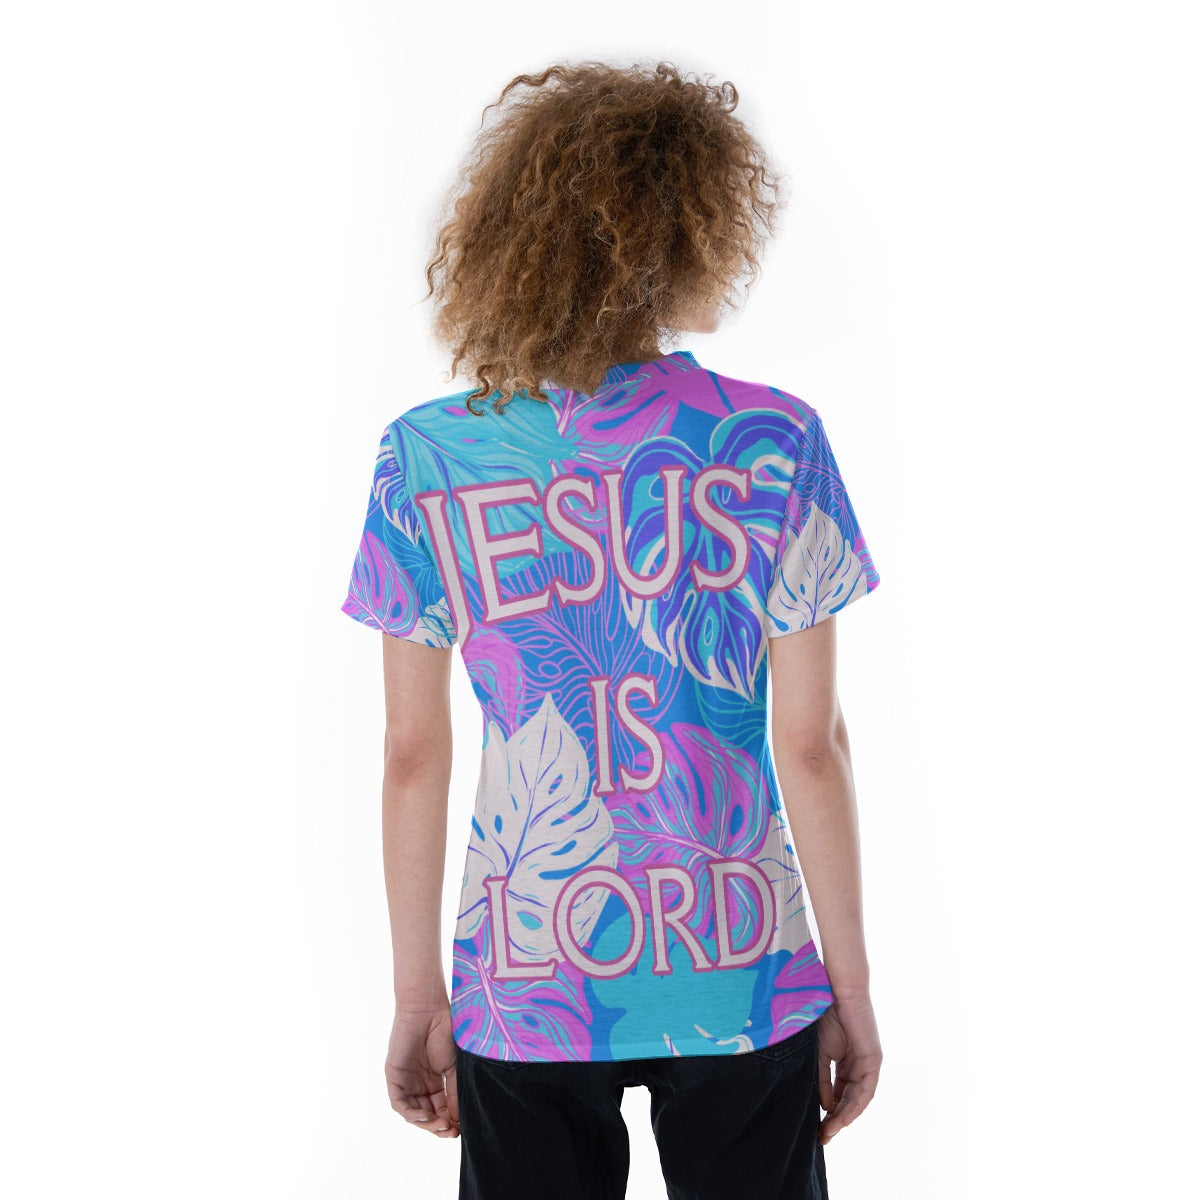 Jesus is LORD V-neck Women's T-shirt